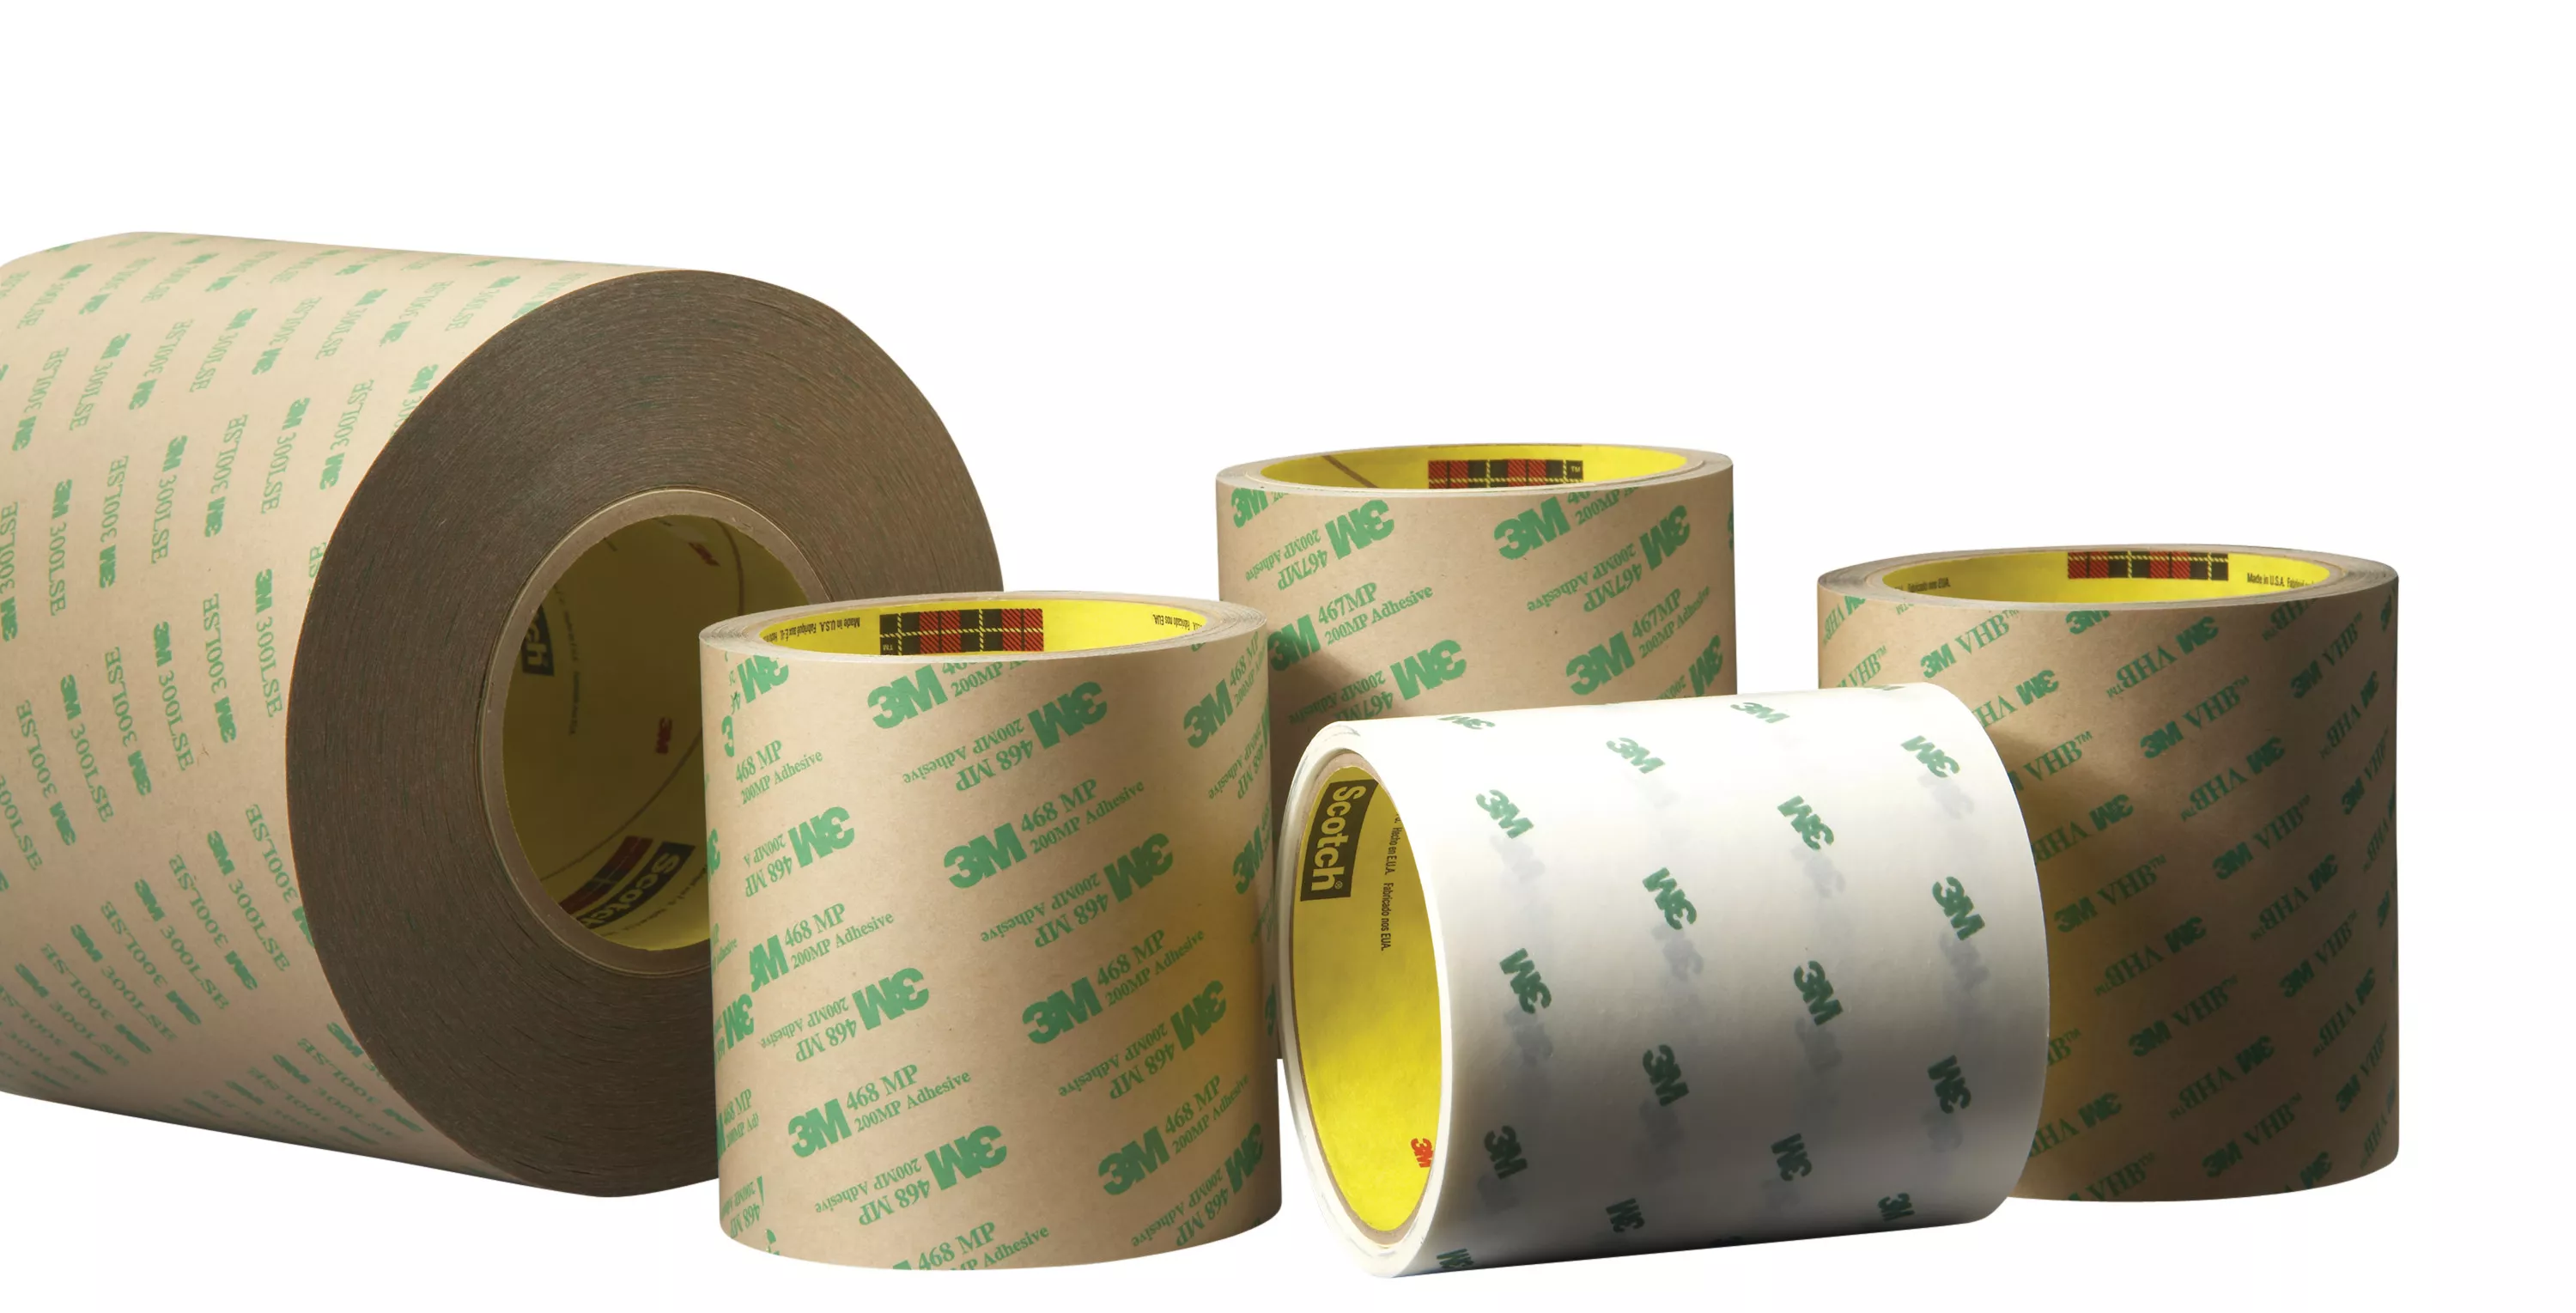 3M™ Adhesive Transfer Tape Double Linered 9555, Clear, 24 in x 36 in, 5
mil, 100 Sheet/Case